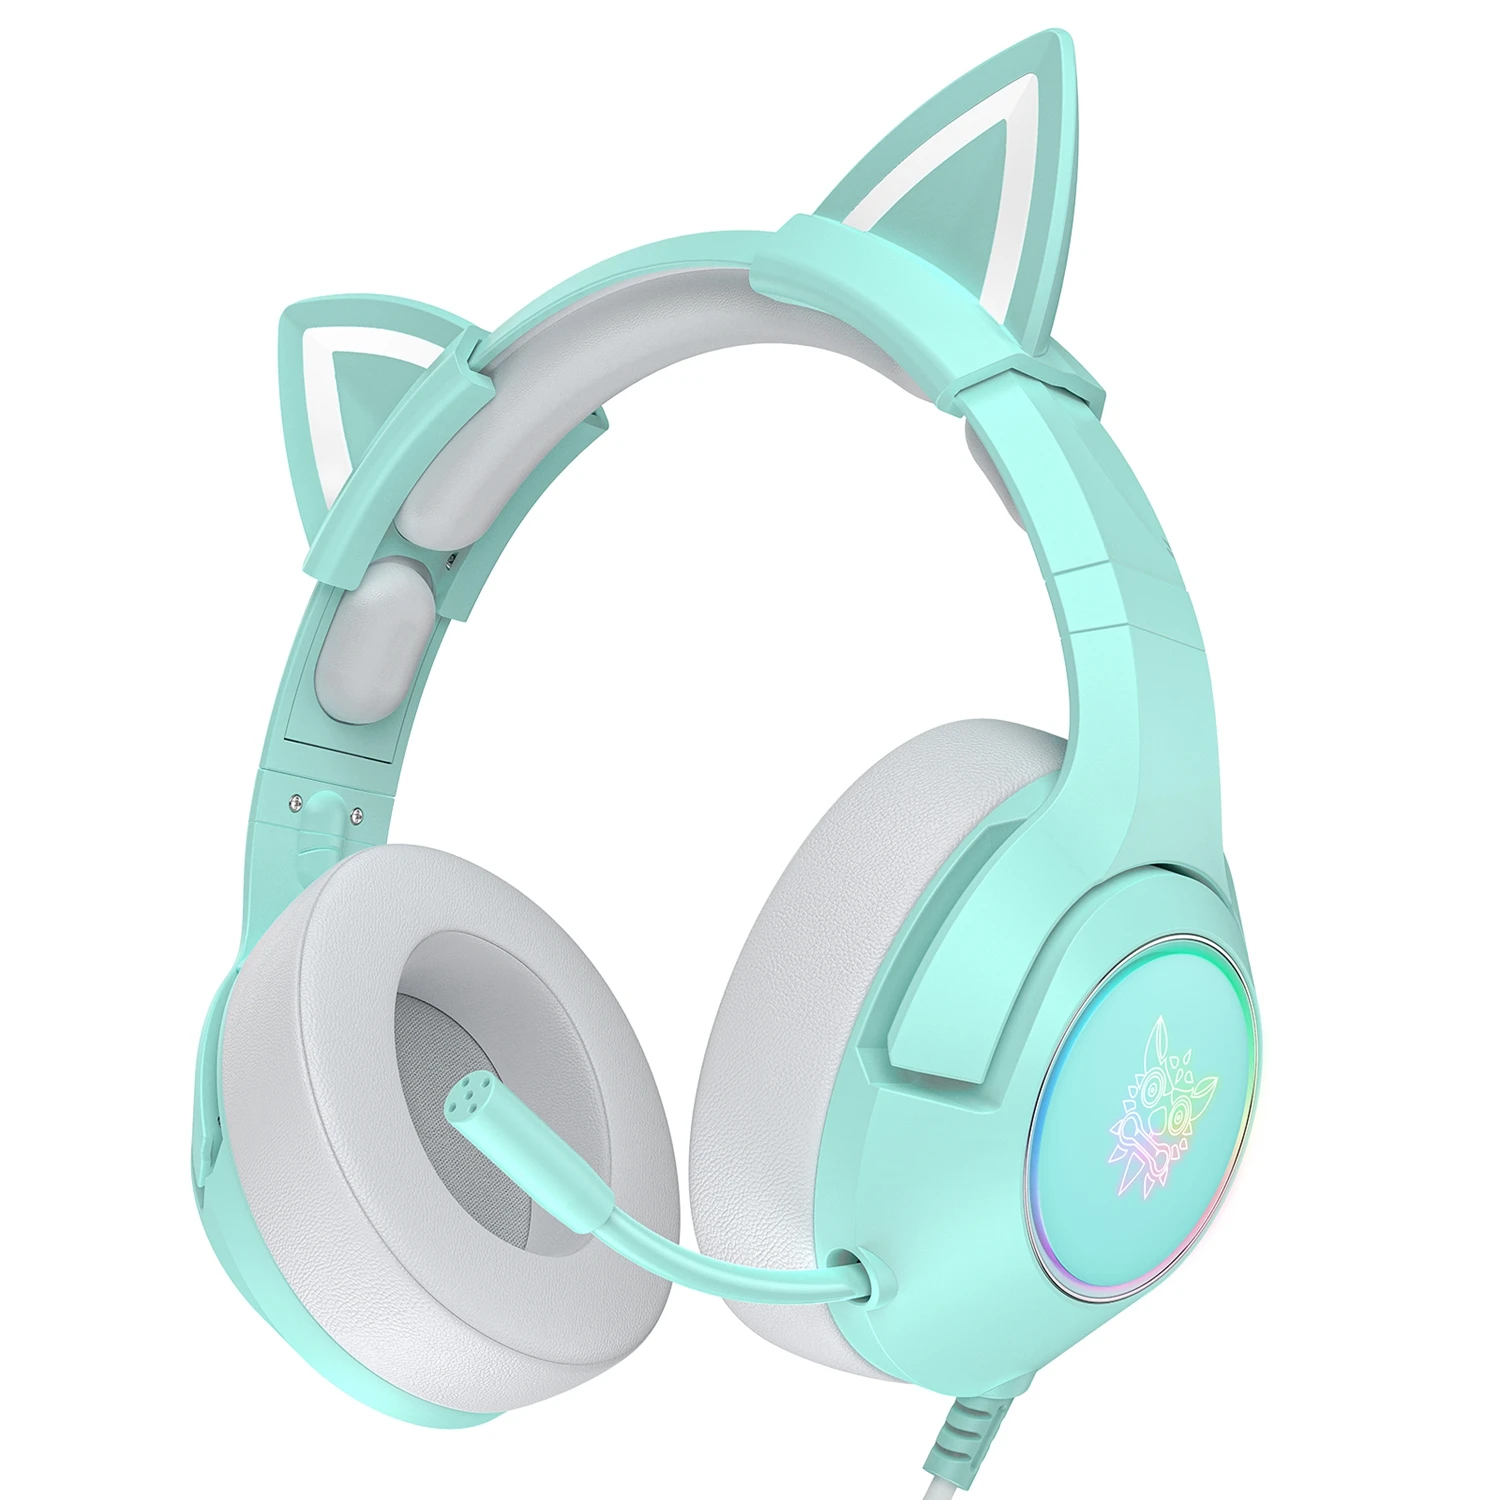 meloen toewijzen Larry Belmont New Design Green Color K9 Cat Ear Gaming Headset With Mic Onikuma Stereo Pc  Ps4 Wired Gaming Headphone Rgb Led Gamer Headphone - Buy Gaming Headset  Stereo Gamer Headphones With Microphone,Onikuma Cat